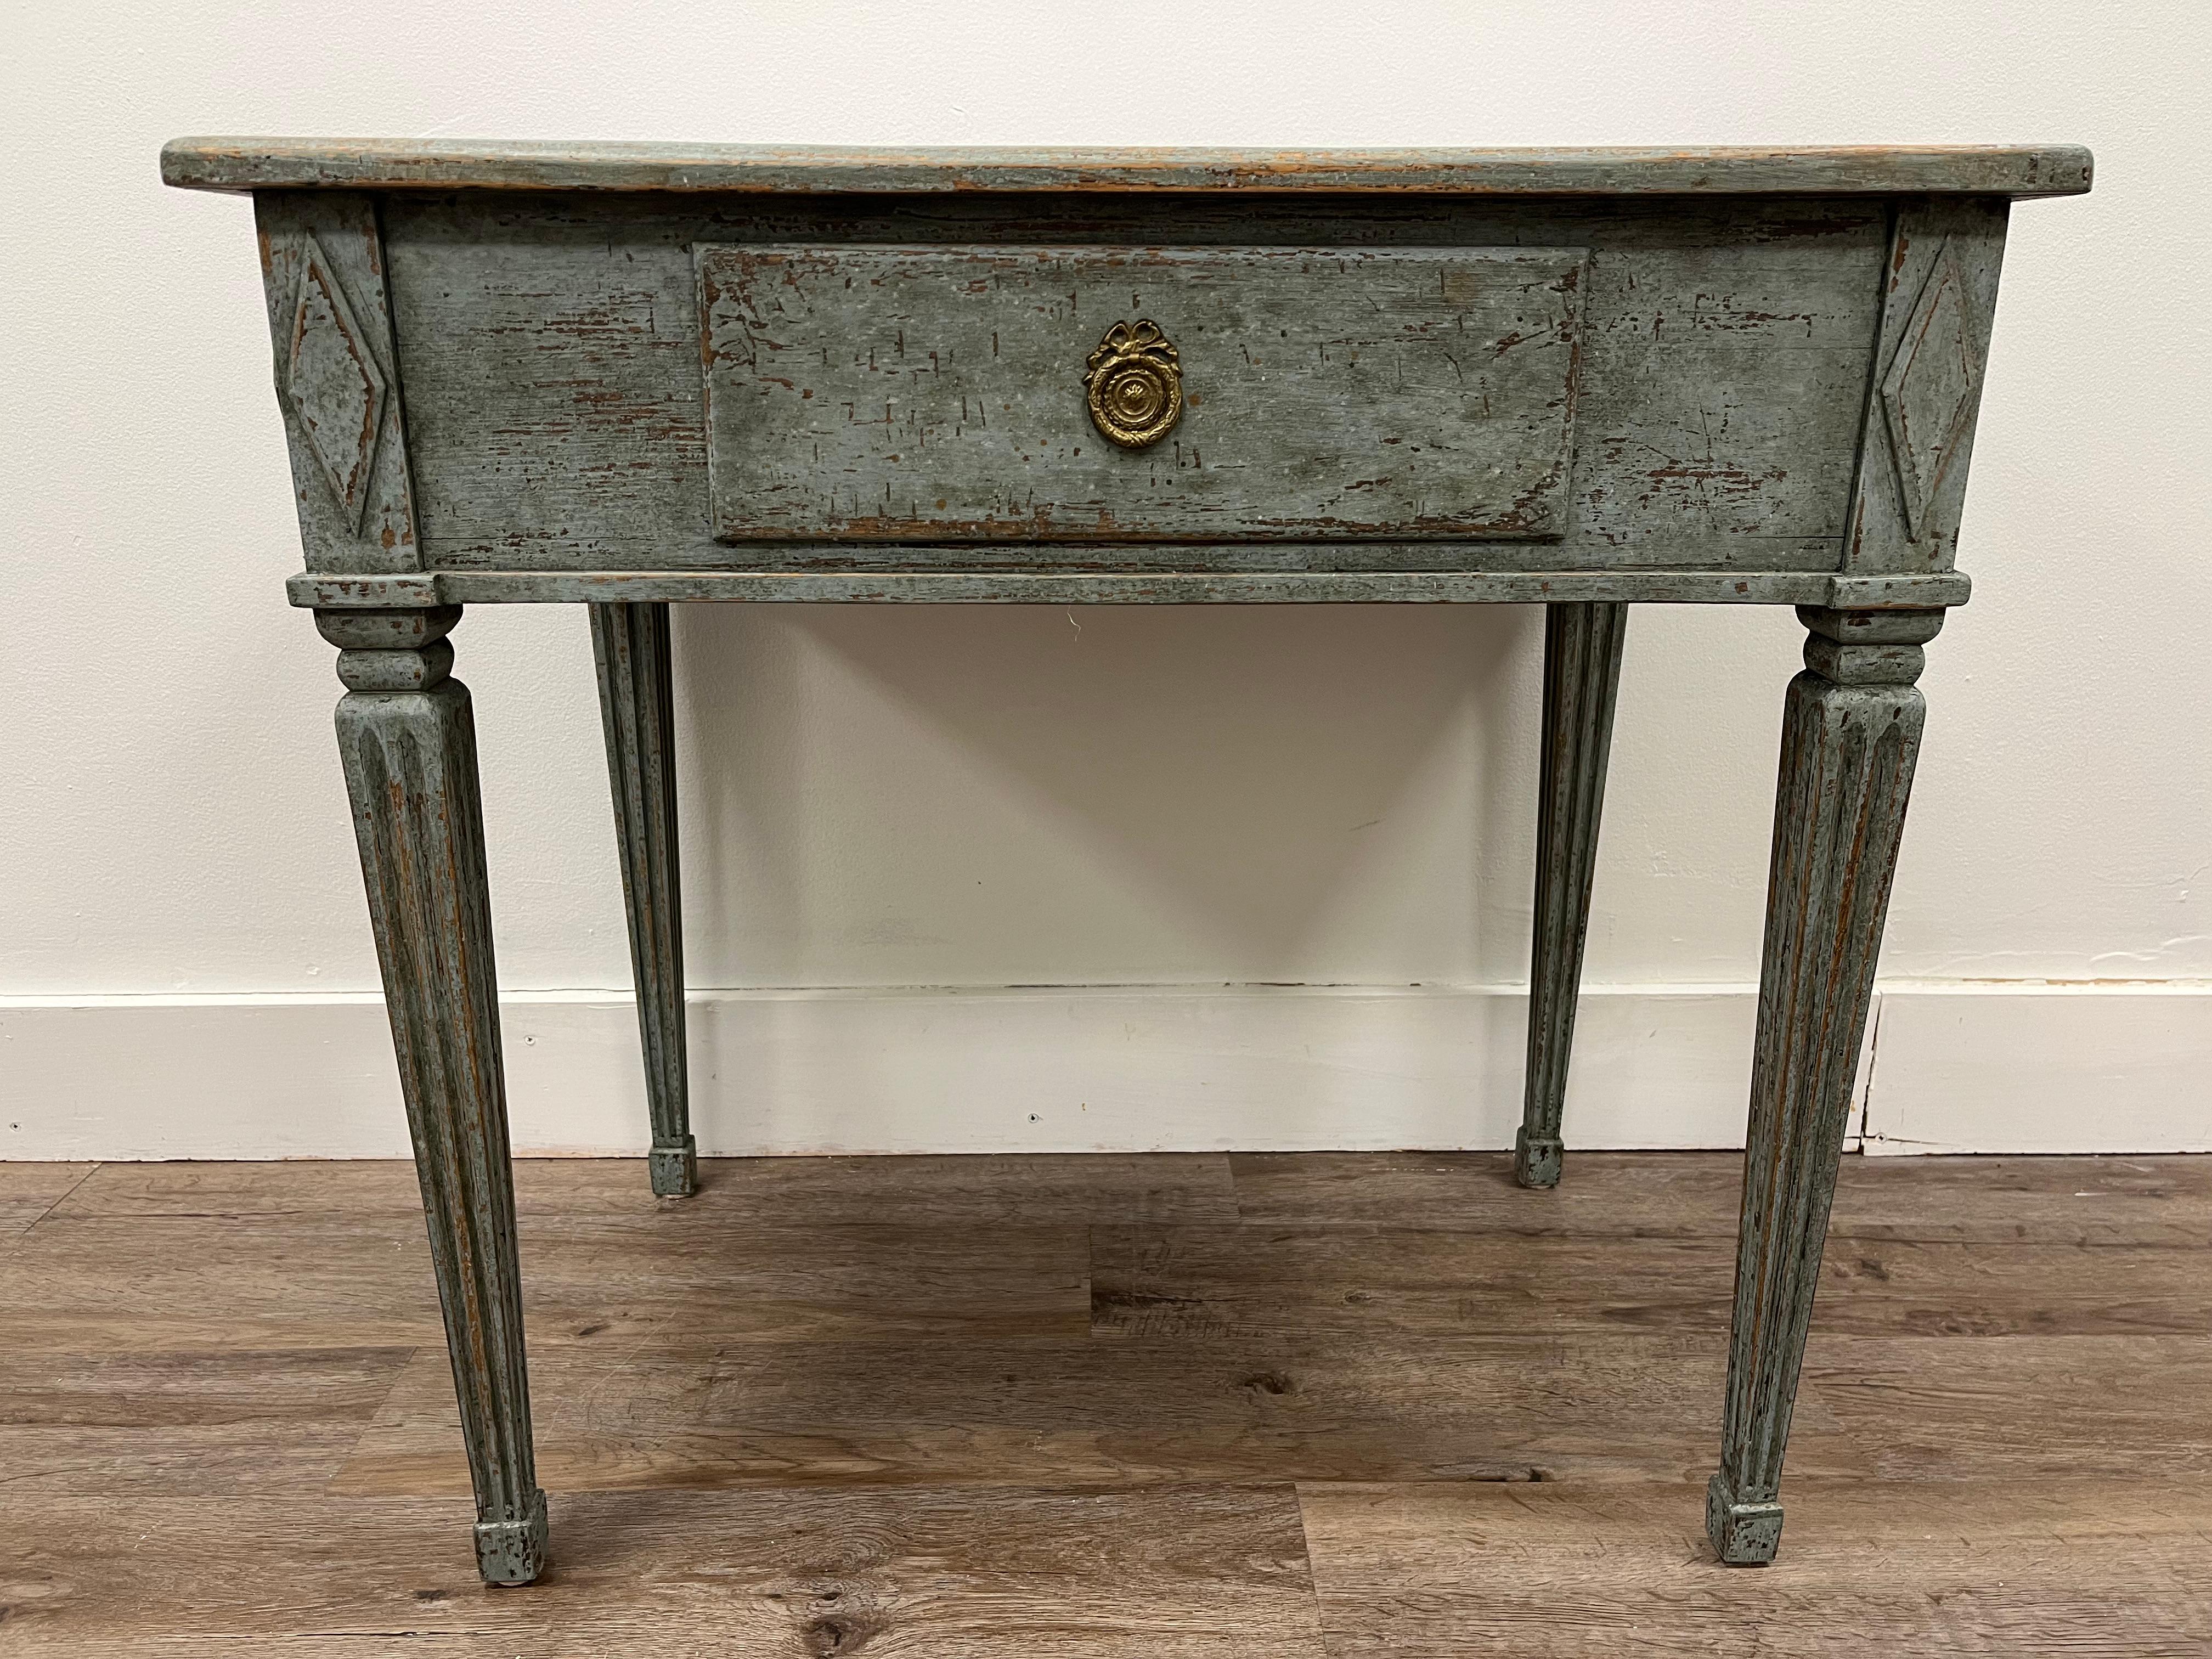 A Gustavian style table with Dutch tile top. Single drawer with original brass pull. Frame has diamond corner details. Legs are tapered and fluted. In original blue paint.